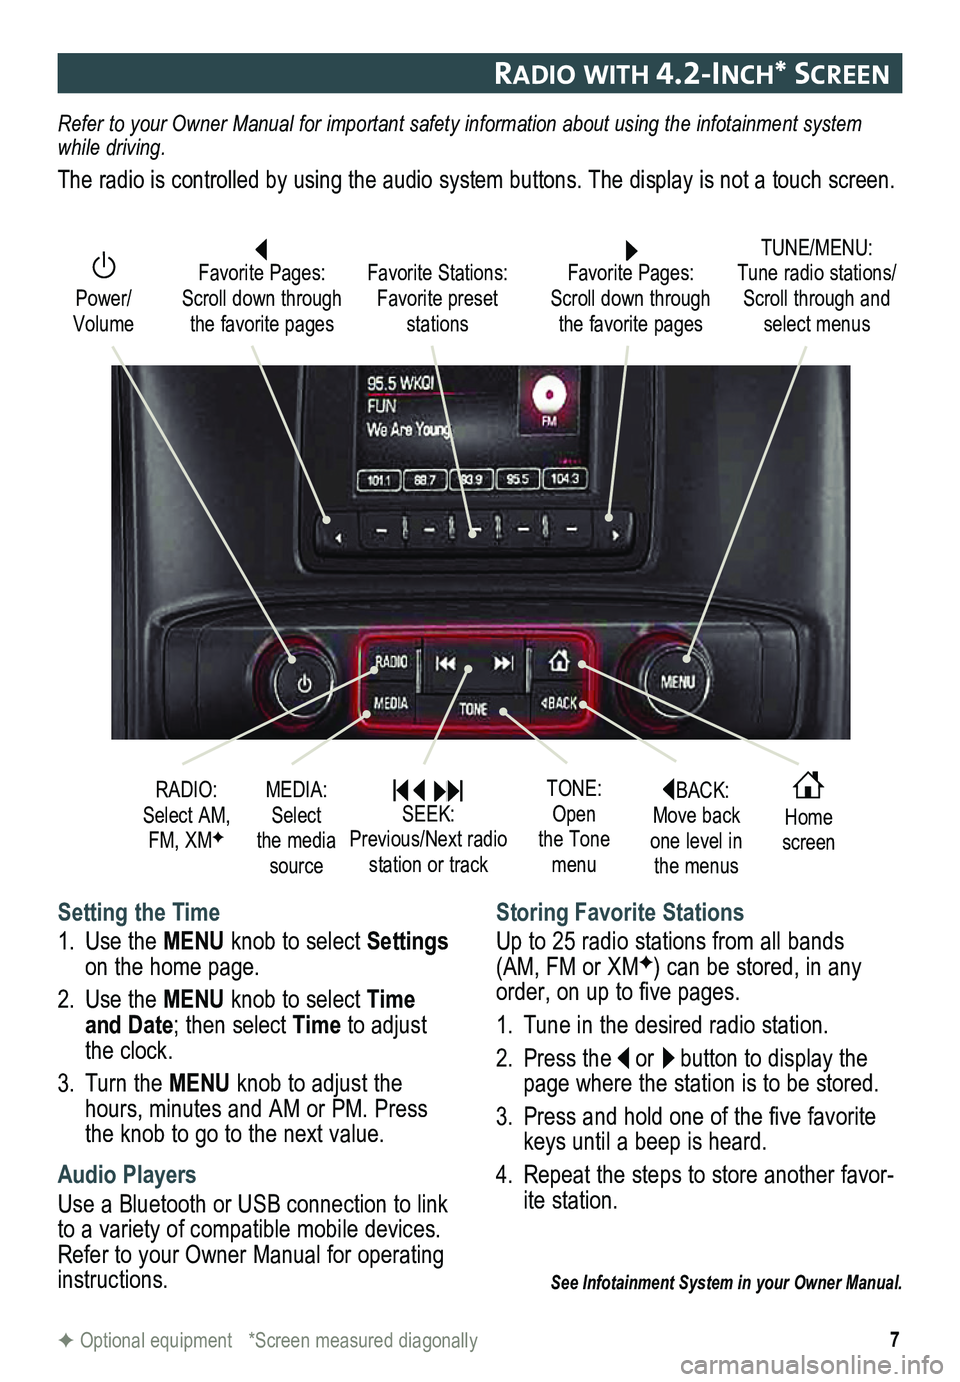 GMC CANYON 2015  Get To Know Guide 7
radIo WIth 4.2-Inch* screen
F Optional equipment   *Screen measured diagonally
Setting the Time
1. Use the MENU knob to select Settings on the home page.
2. Use the MENU knob to select Time and Date